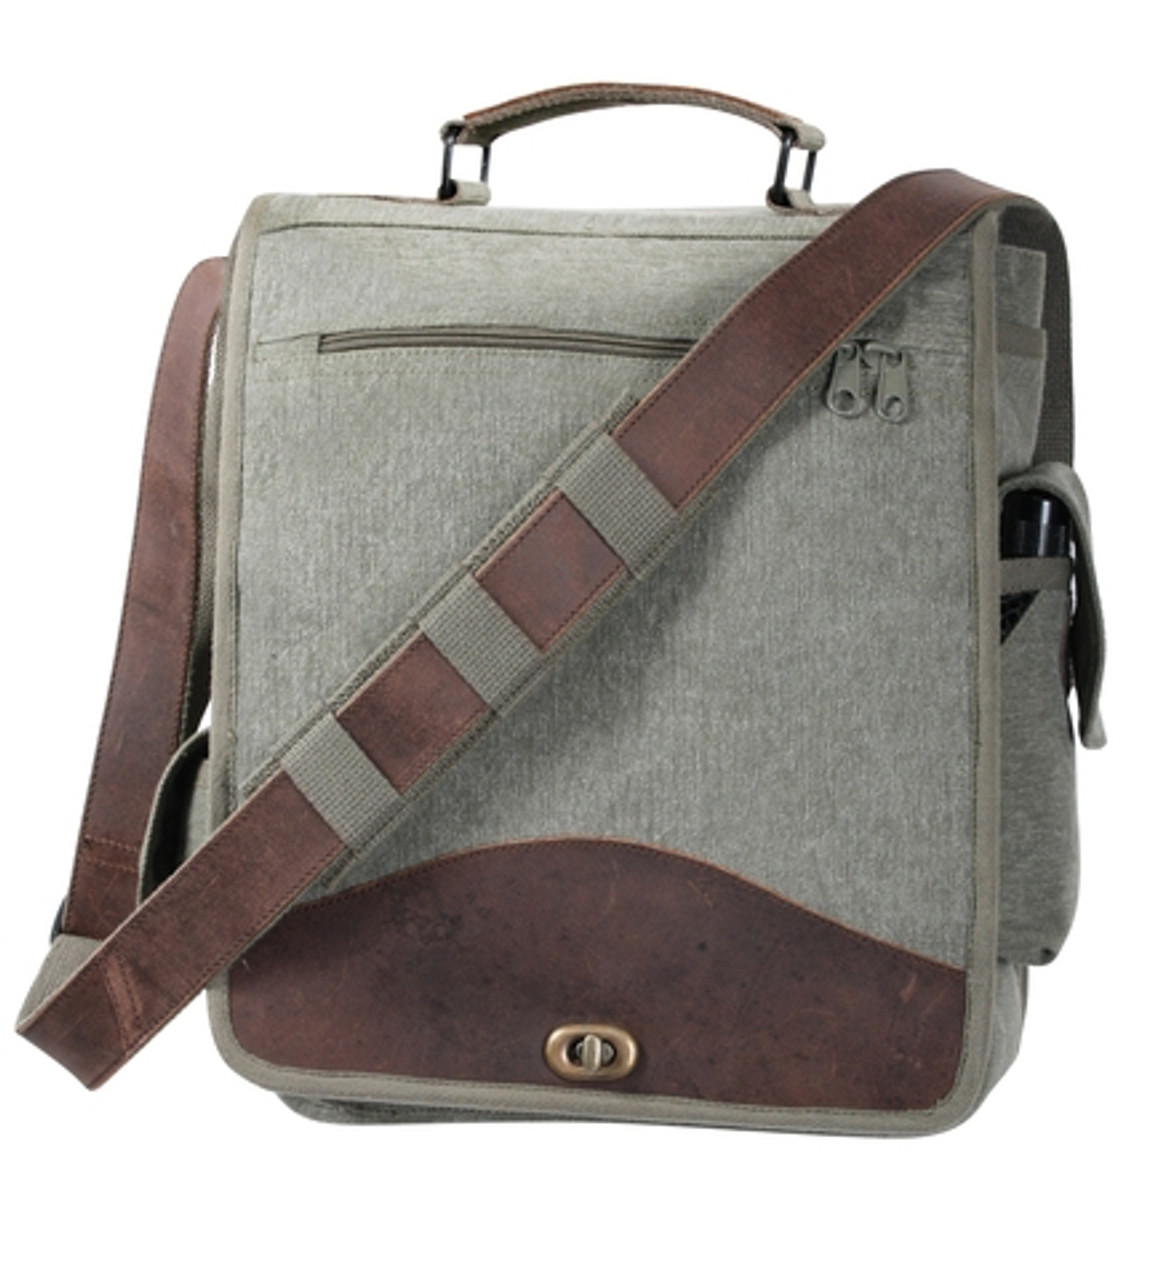 Duffles & Gear Bags | Military Backpacks | Fatigues Army Navy Gear